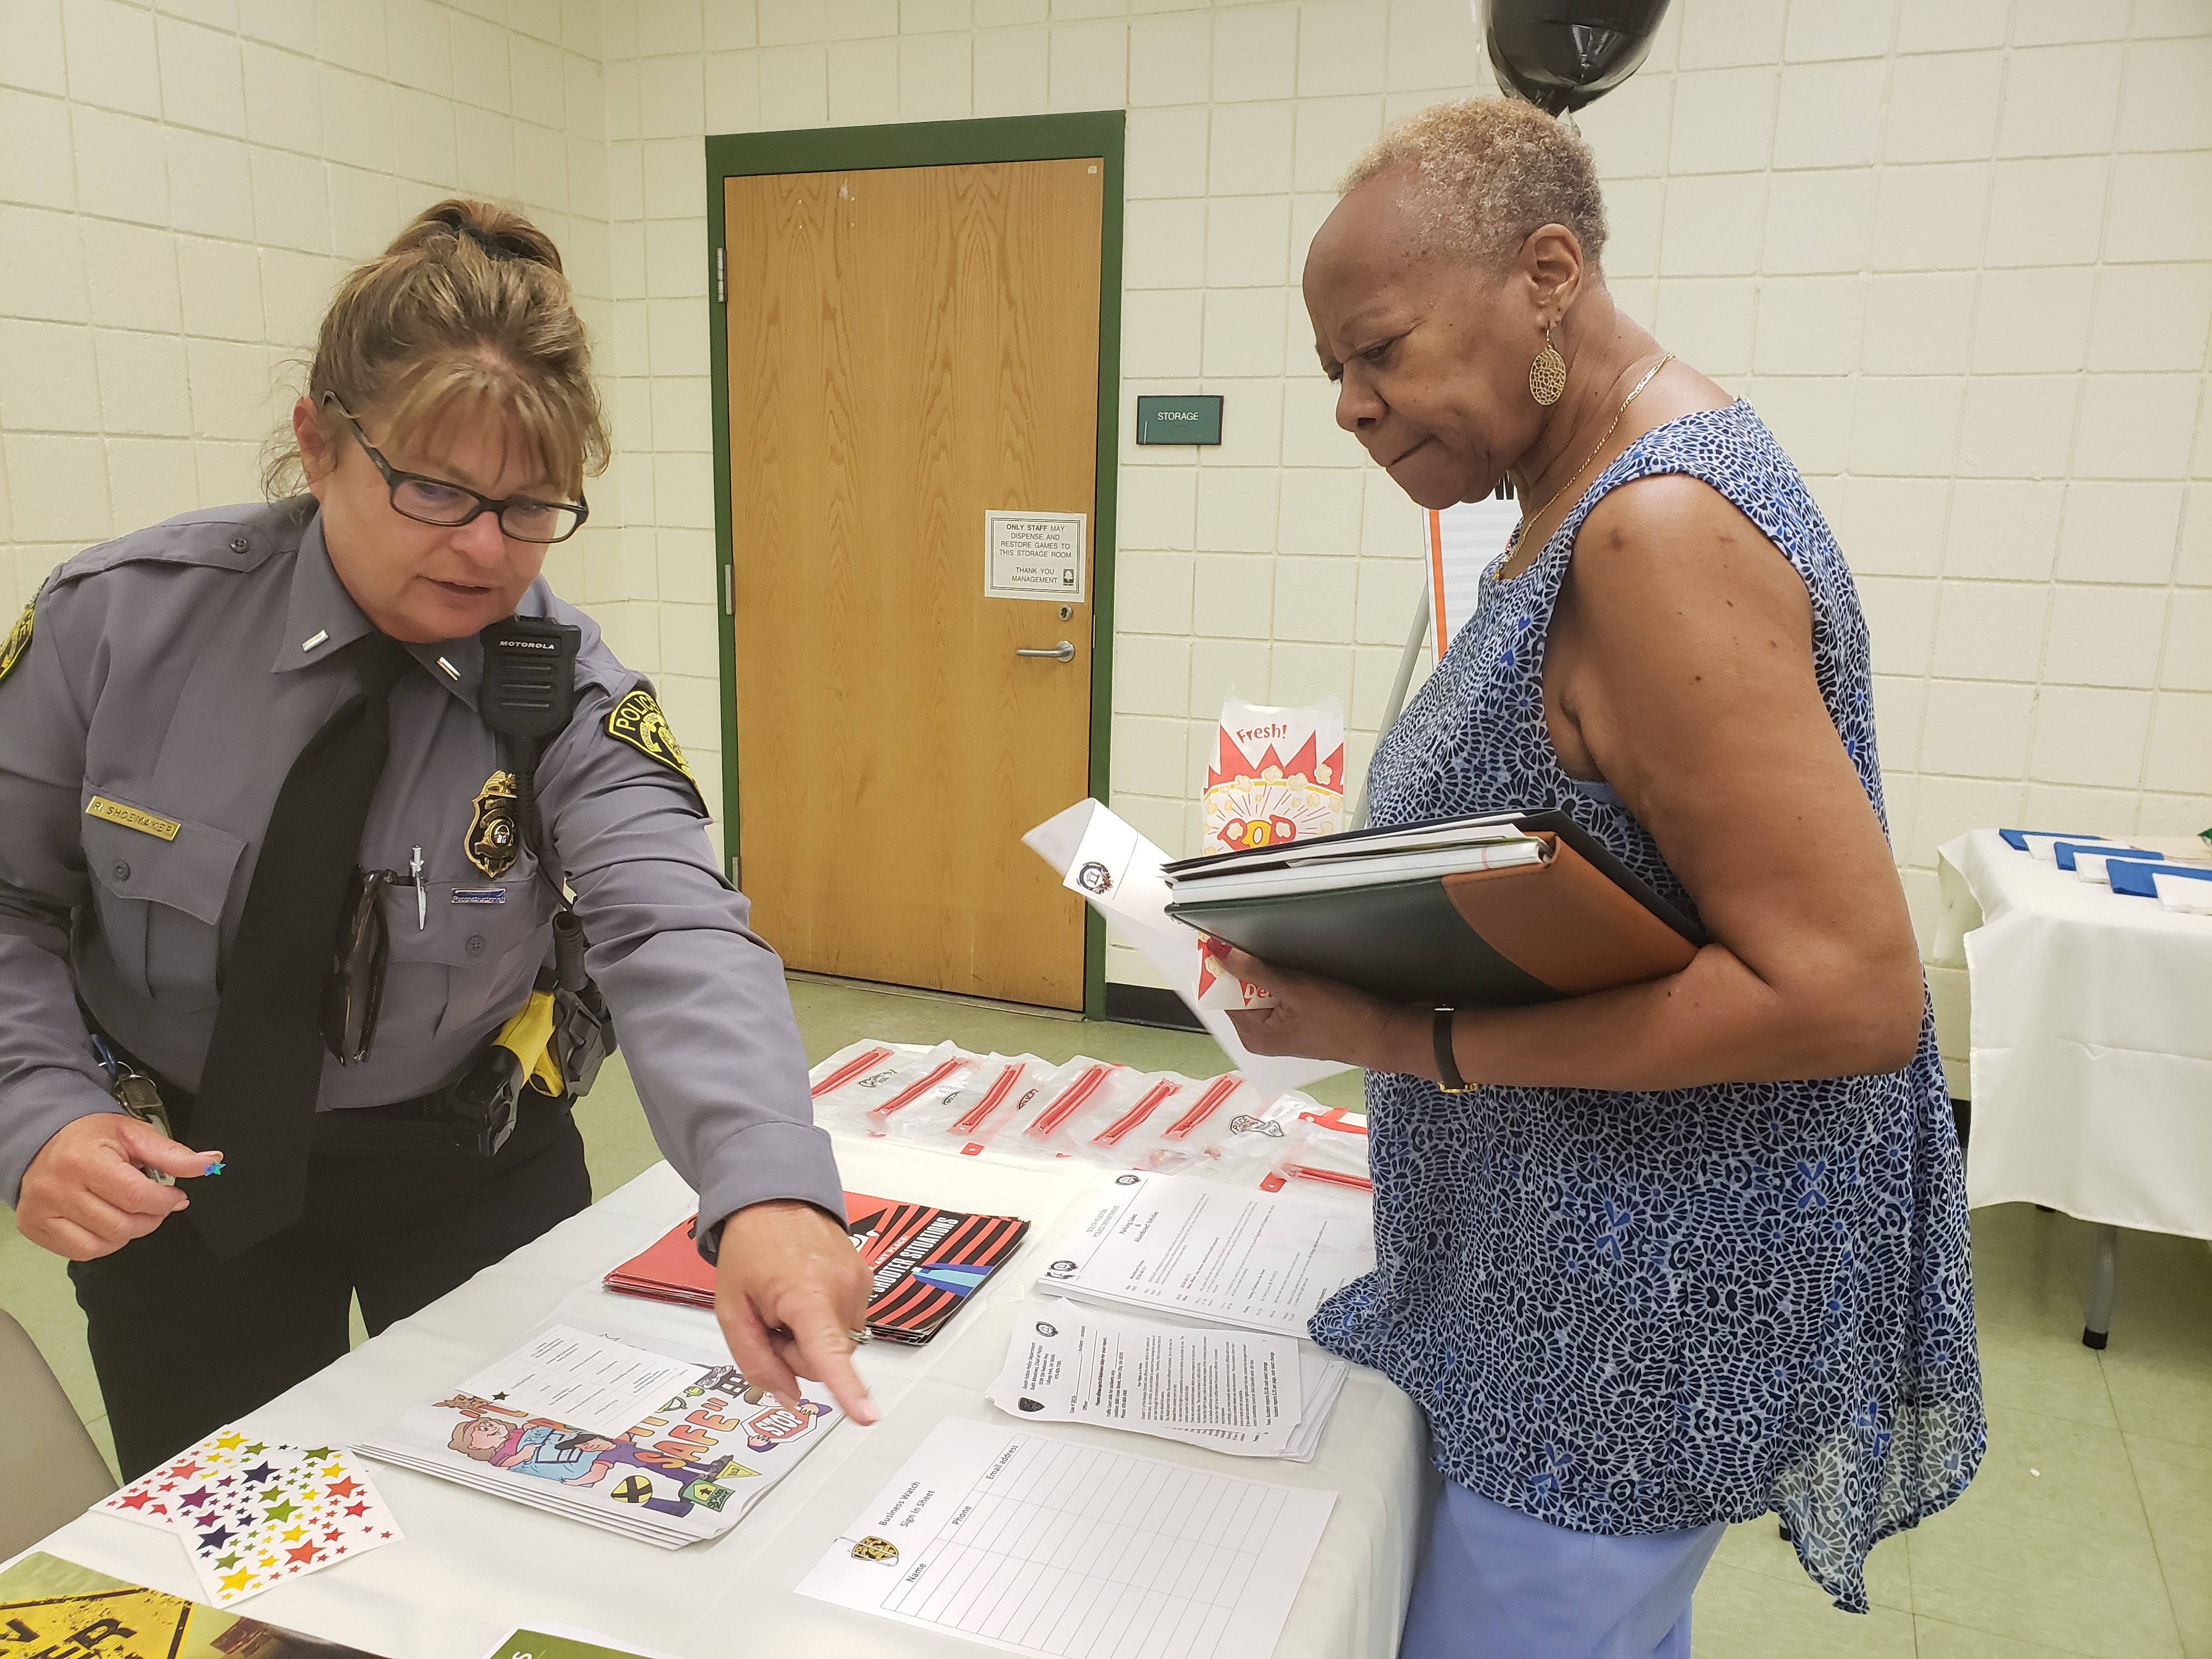 City’s ‘Compliance’ Event Series Aims to Help Residents Avoid Citations and Fines